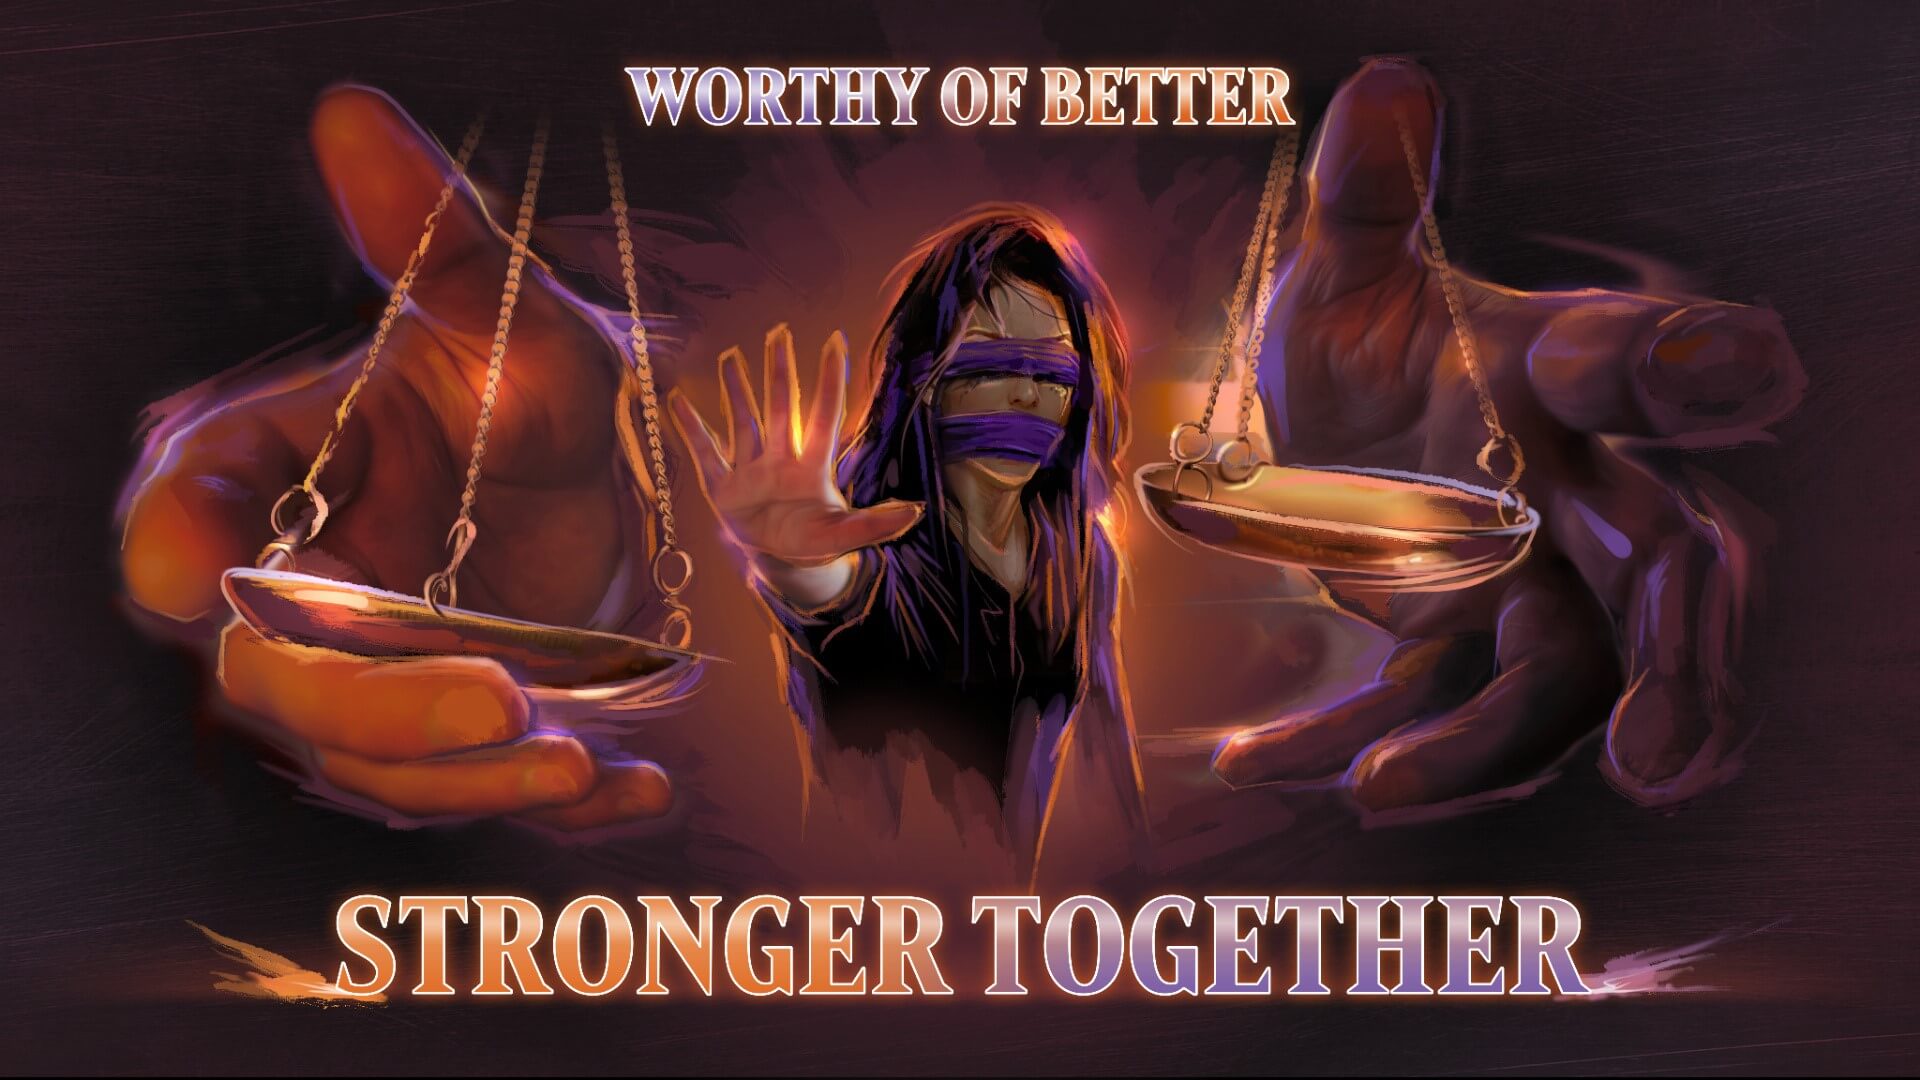 A blindfolded and mouth covered person with long dark hair extends a hand to the viewer, palm out and fingers splayed. On either side of the person is two hands coming toward the viewer, the scales of justice just out of reach of each hand. The text above reads "Worthy of Better". The text below reads "Stronger Together"